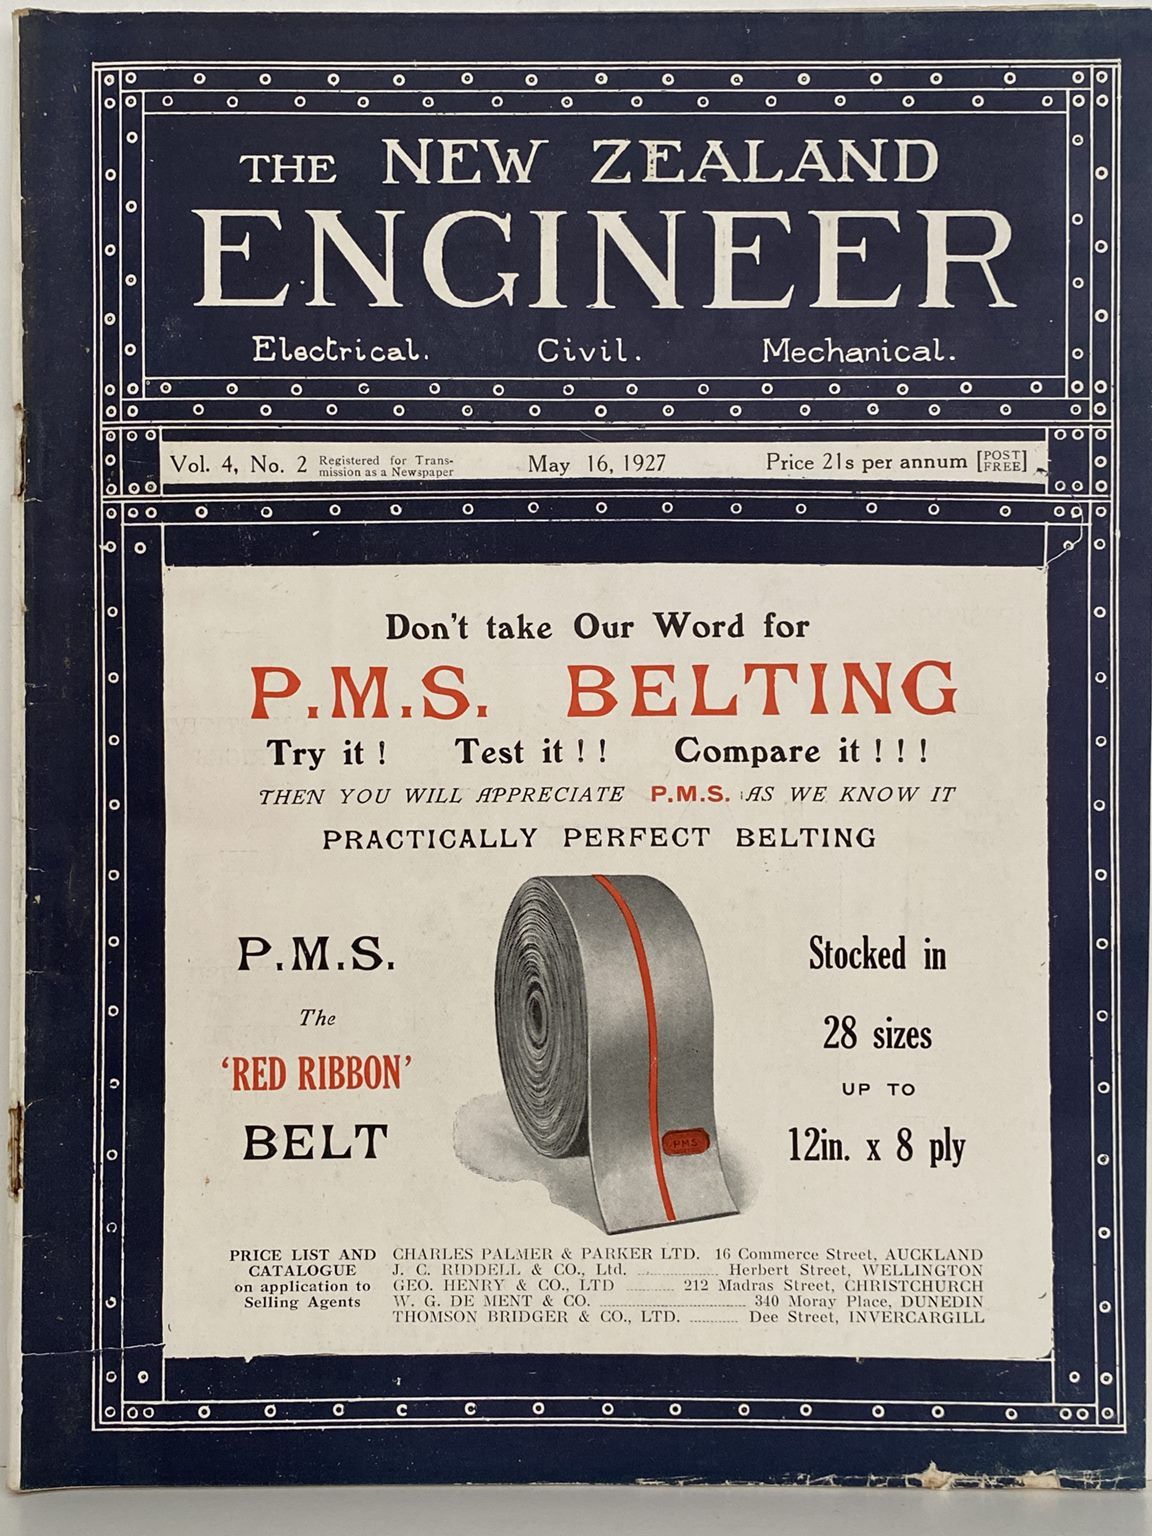 OLD MAGAZINE: The New Zealand Engineer Vol. 4, No. 2 - 16 May 1927